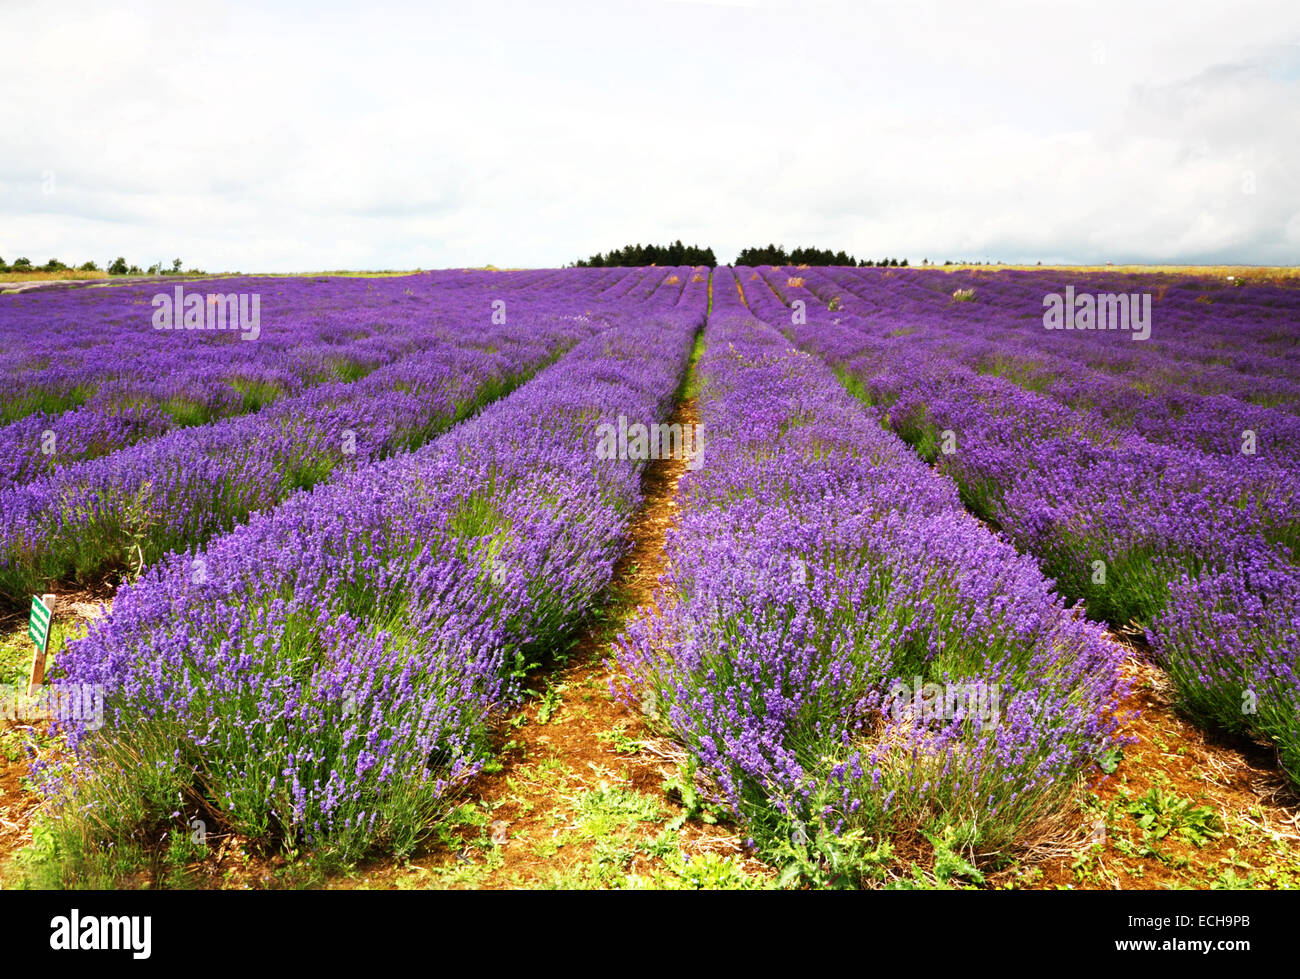 Converging rows of purple lavender in a field. Stock Photo